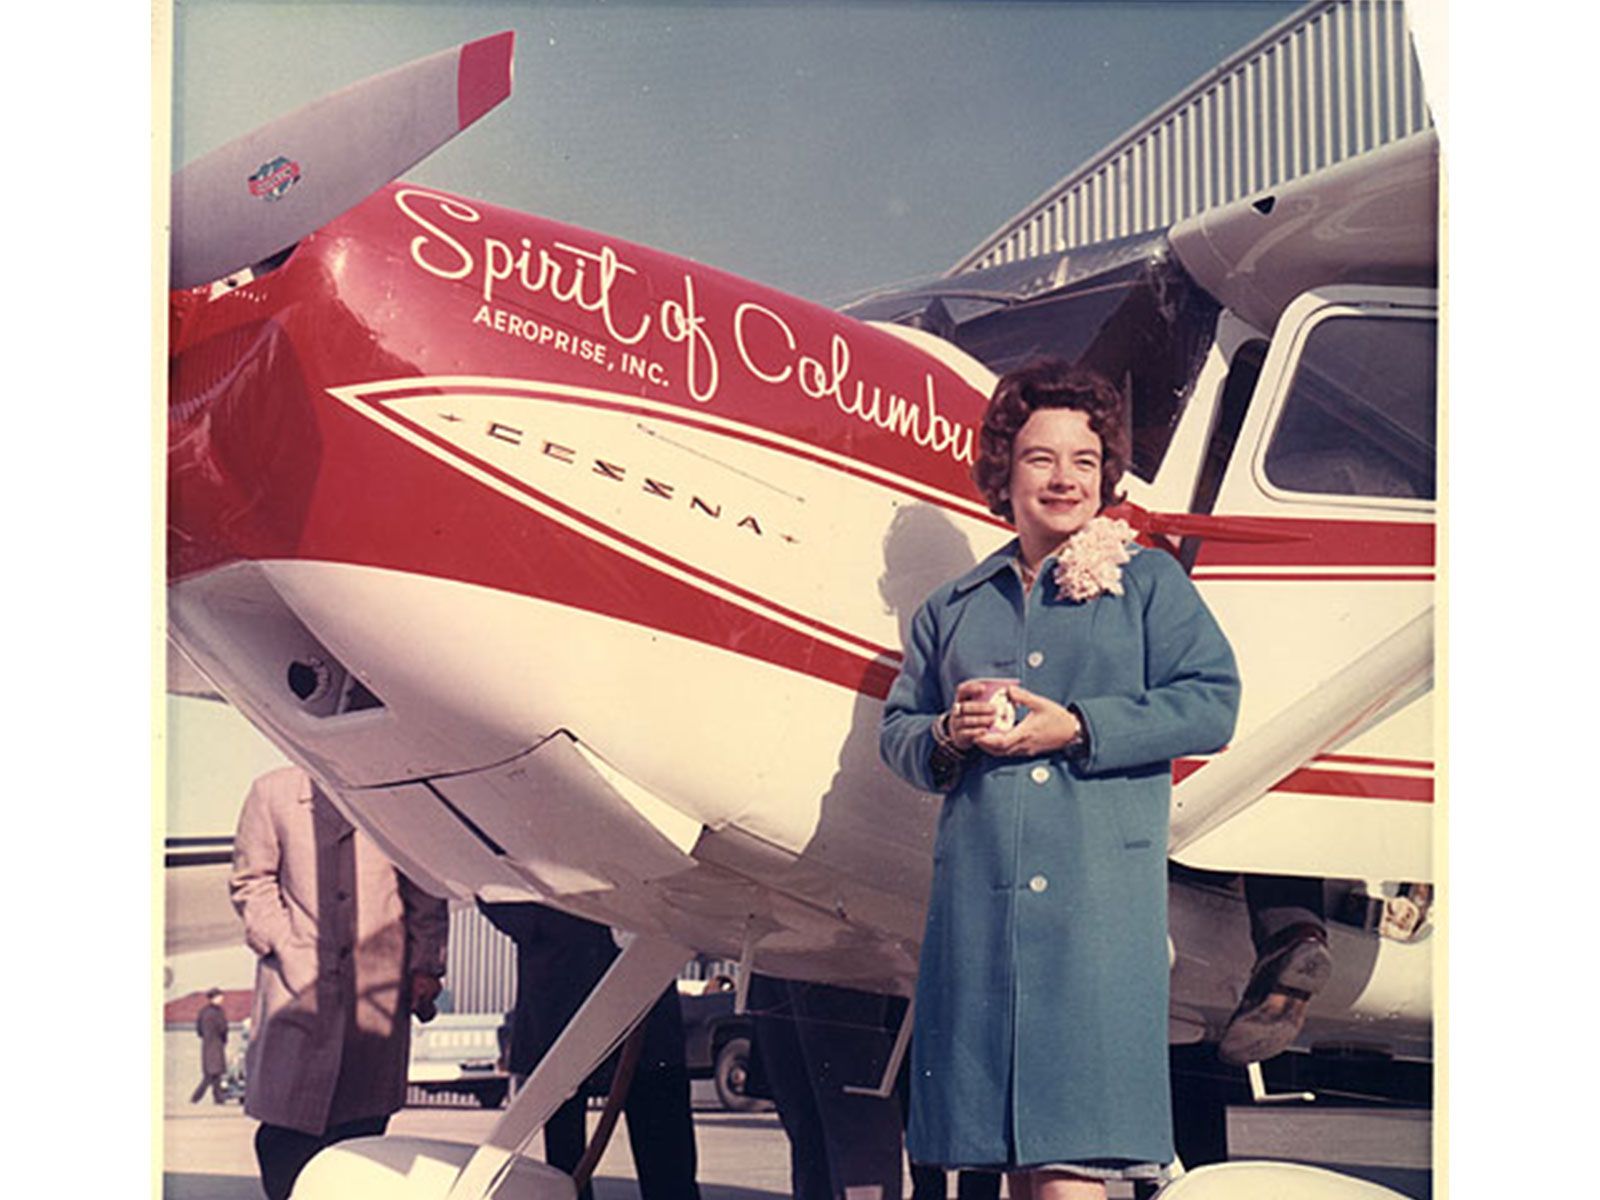 Who Was the First Woman to Fly Solo Around the World?